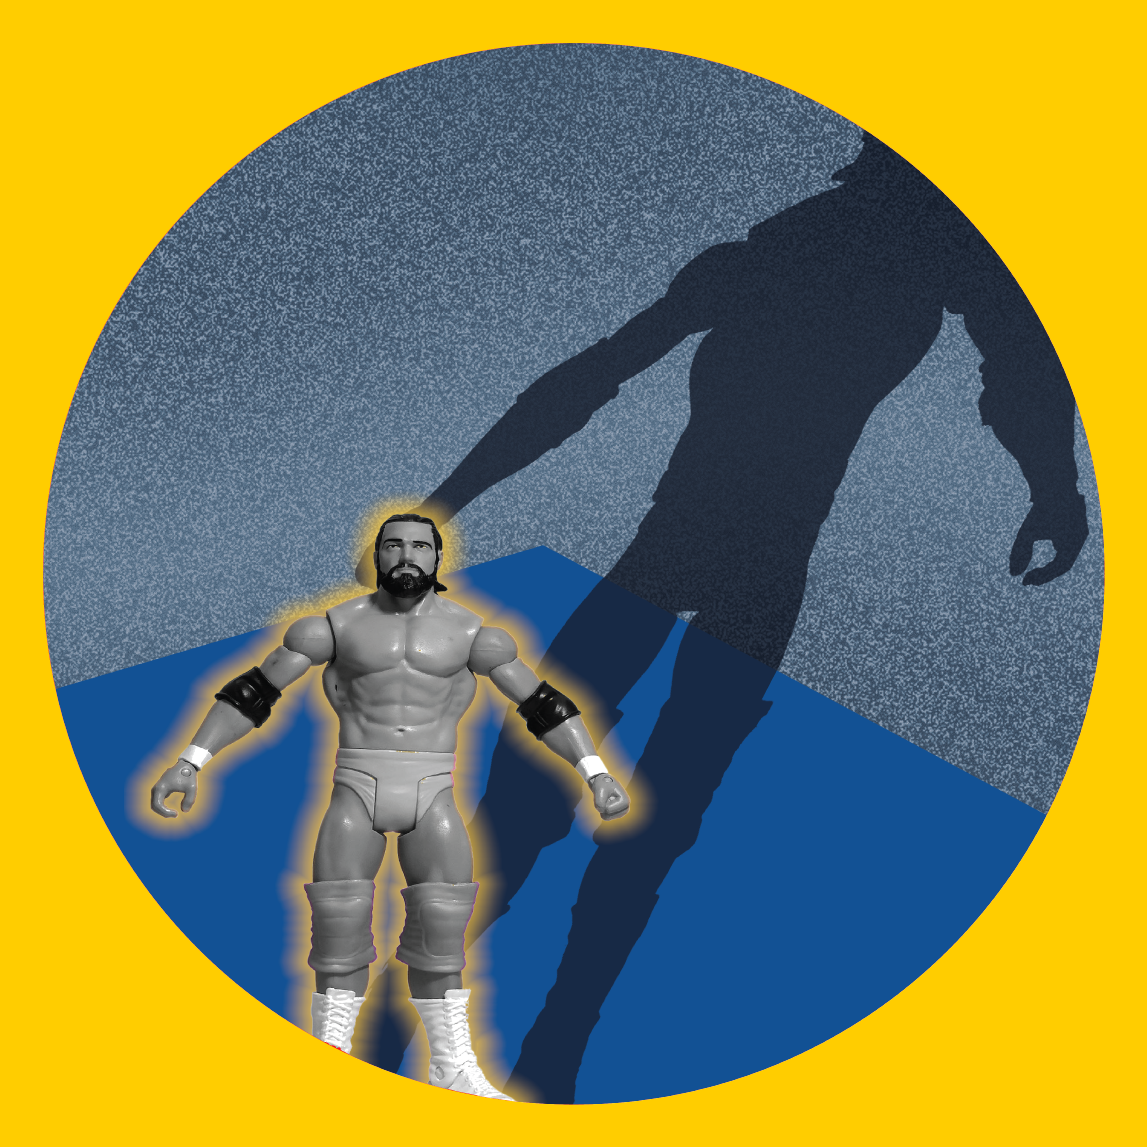 An action figure on a blue and yellow background